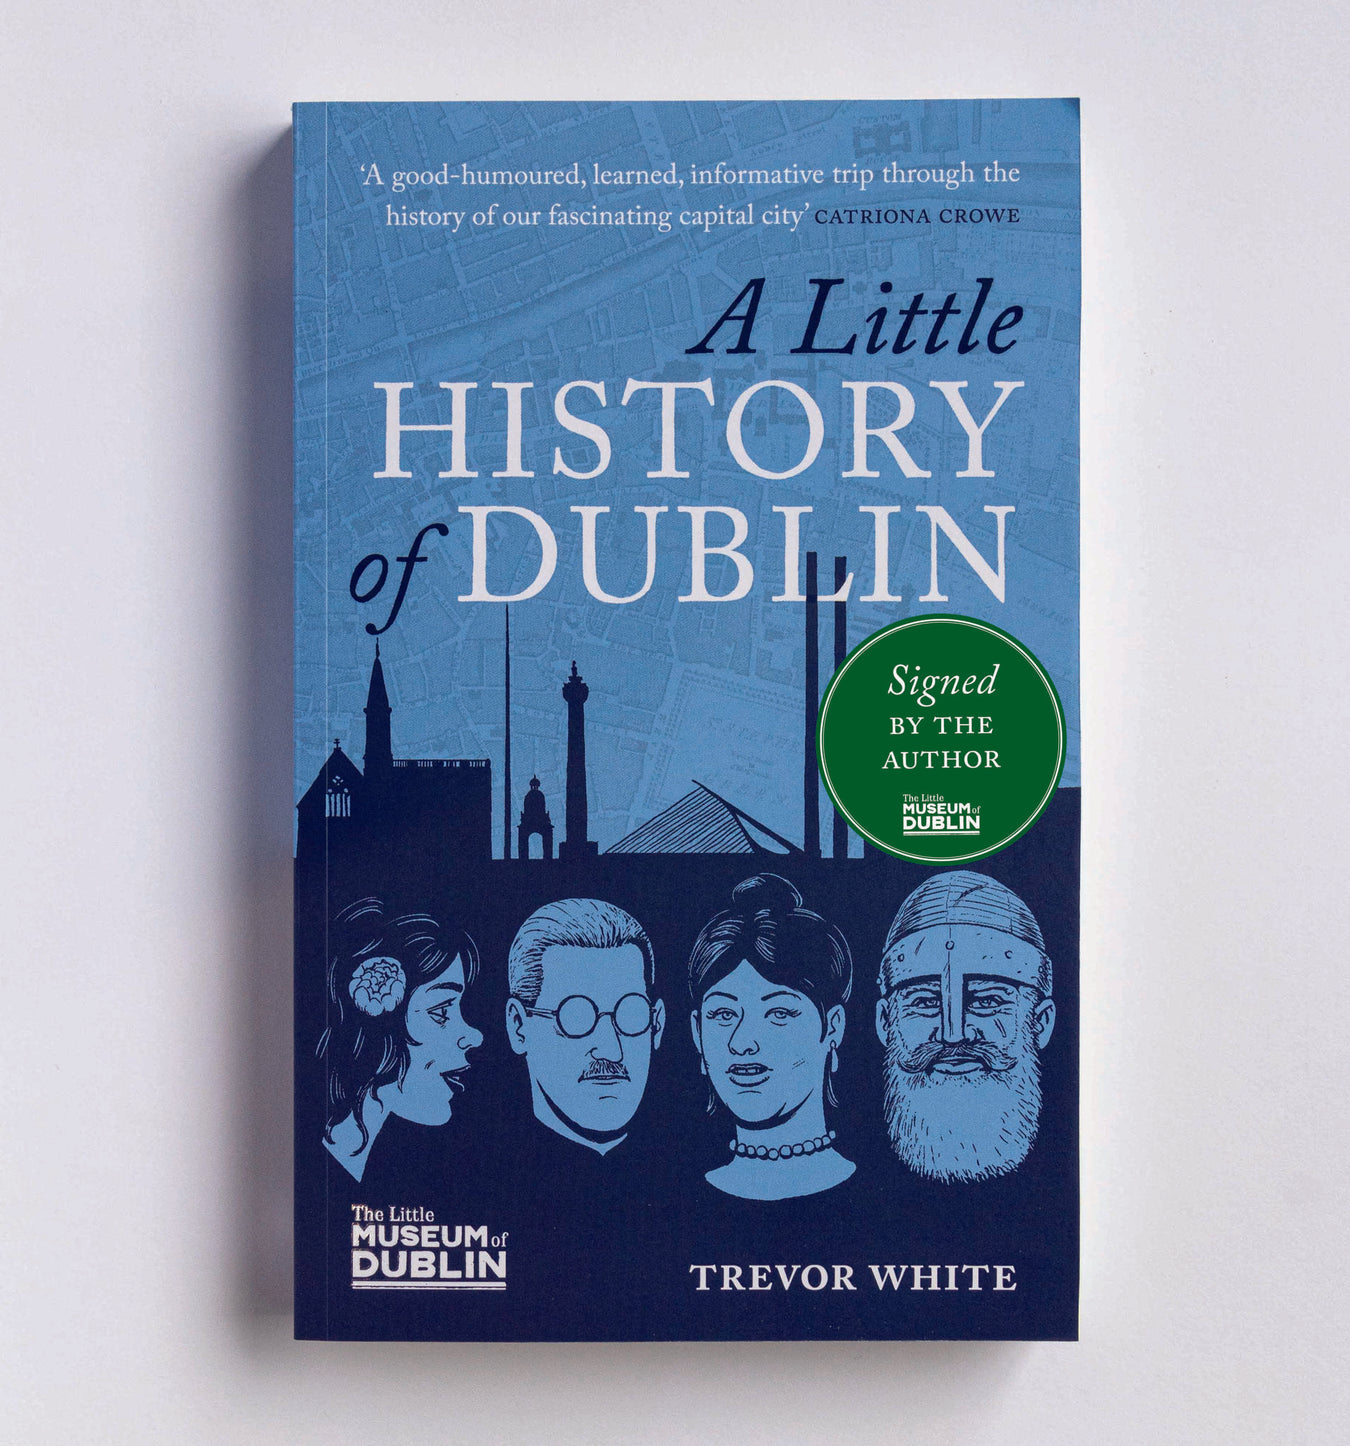 A Perfect Gift | The Little Museum of Dublin